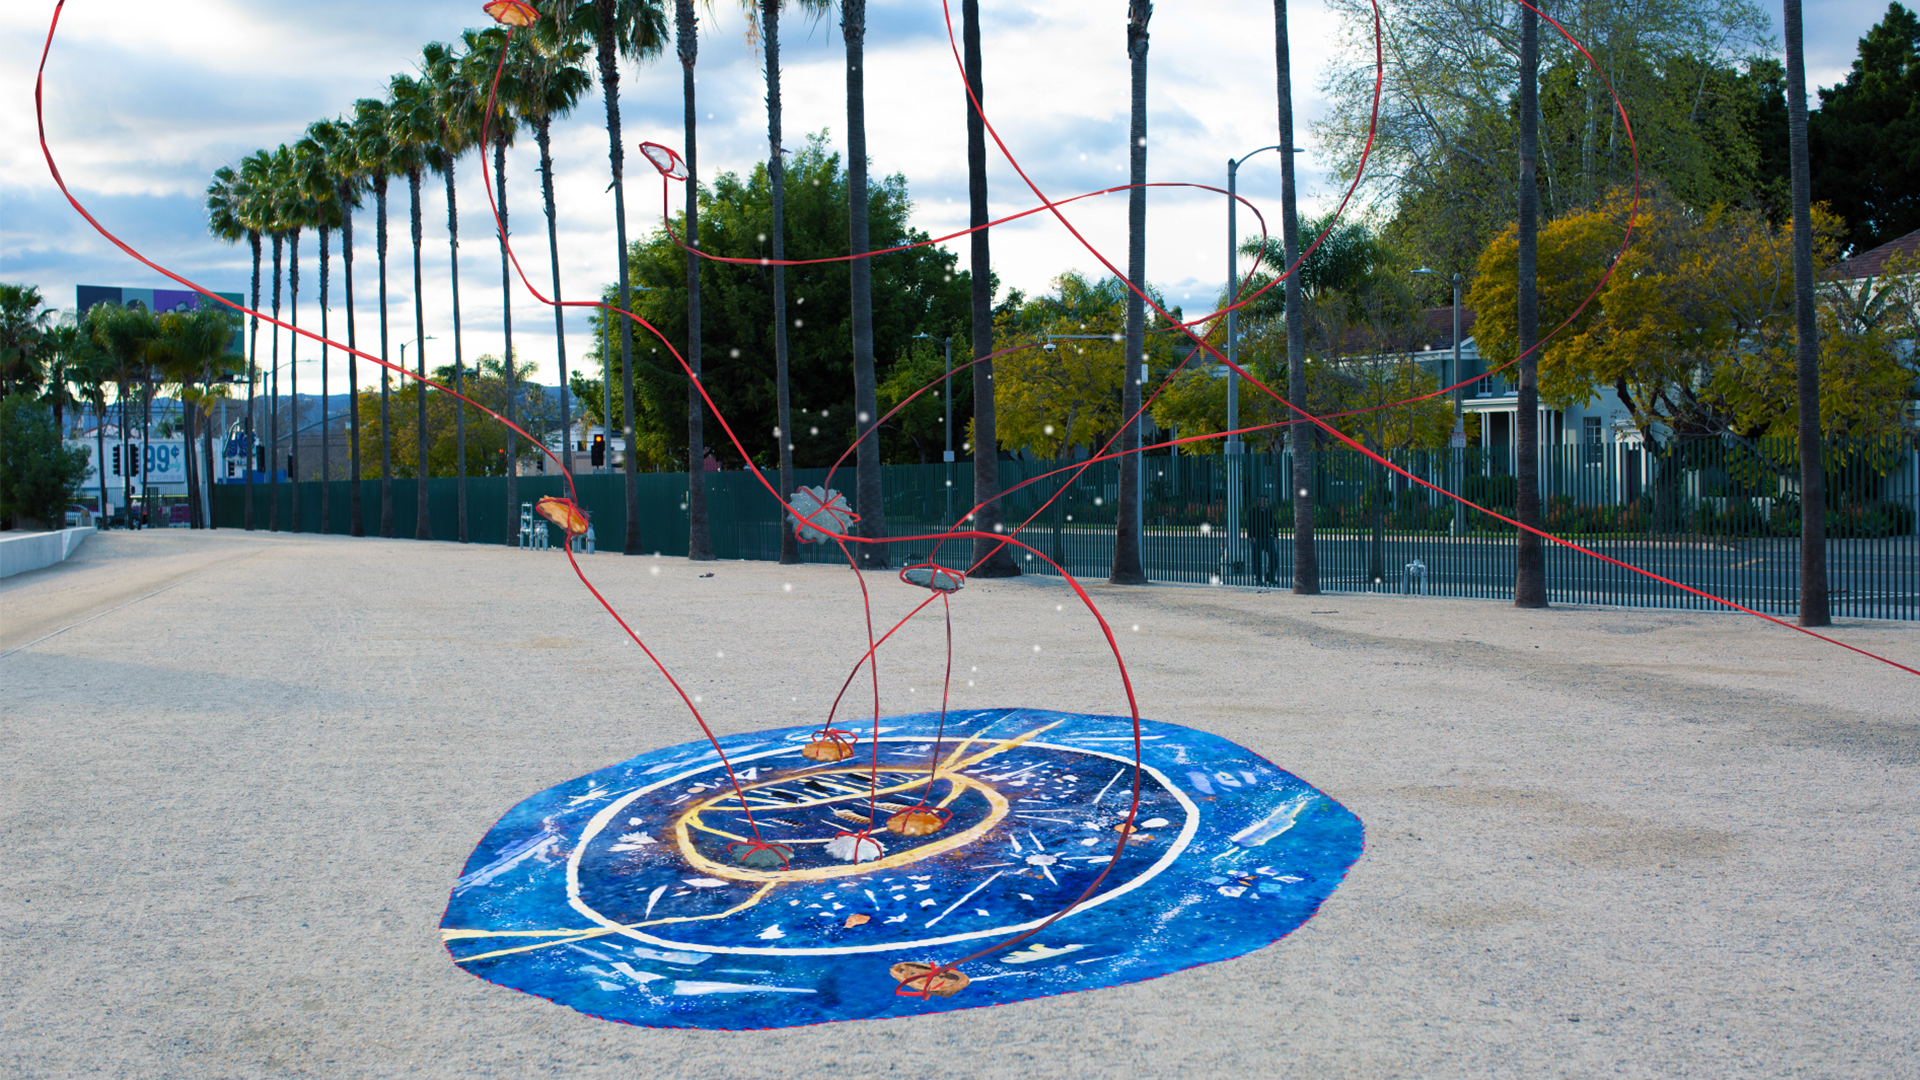 Red swirling lines reach into the sky from a round blue mat laid on decomposed granite with palm trees in the background